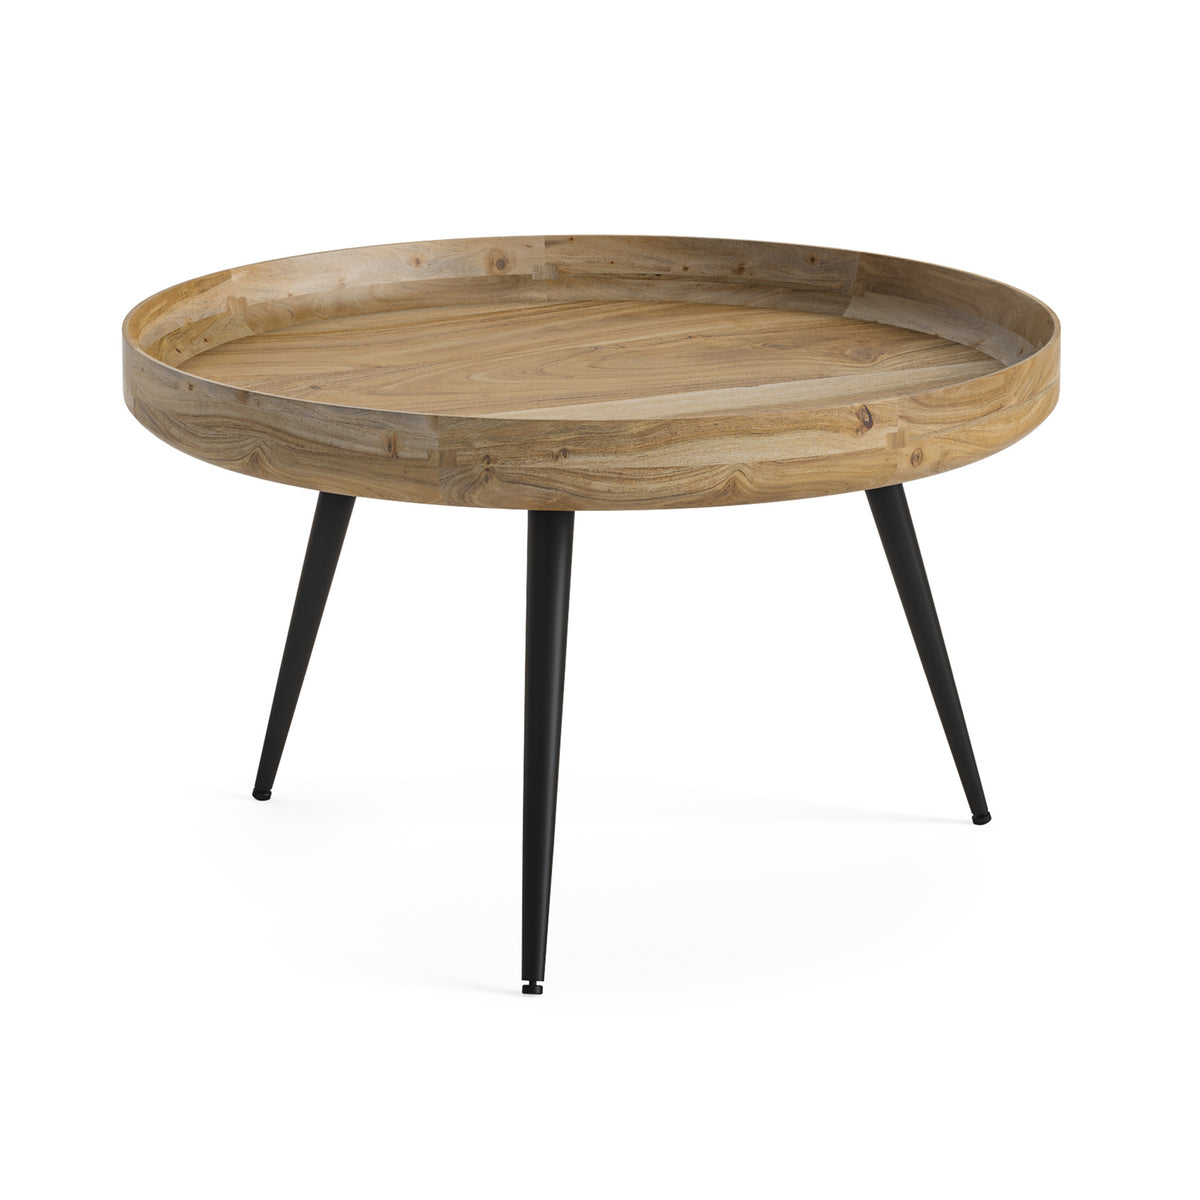 Boa 80cm Mango Wooden Round Natural Coffee Table from Roseland Furniture